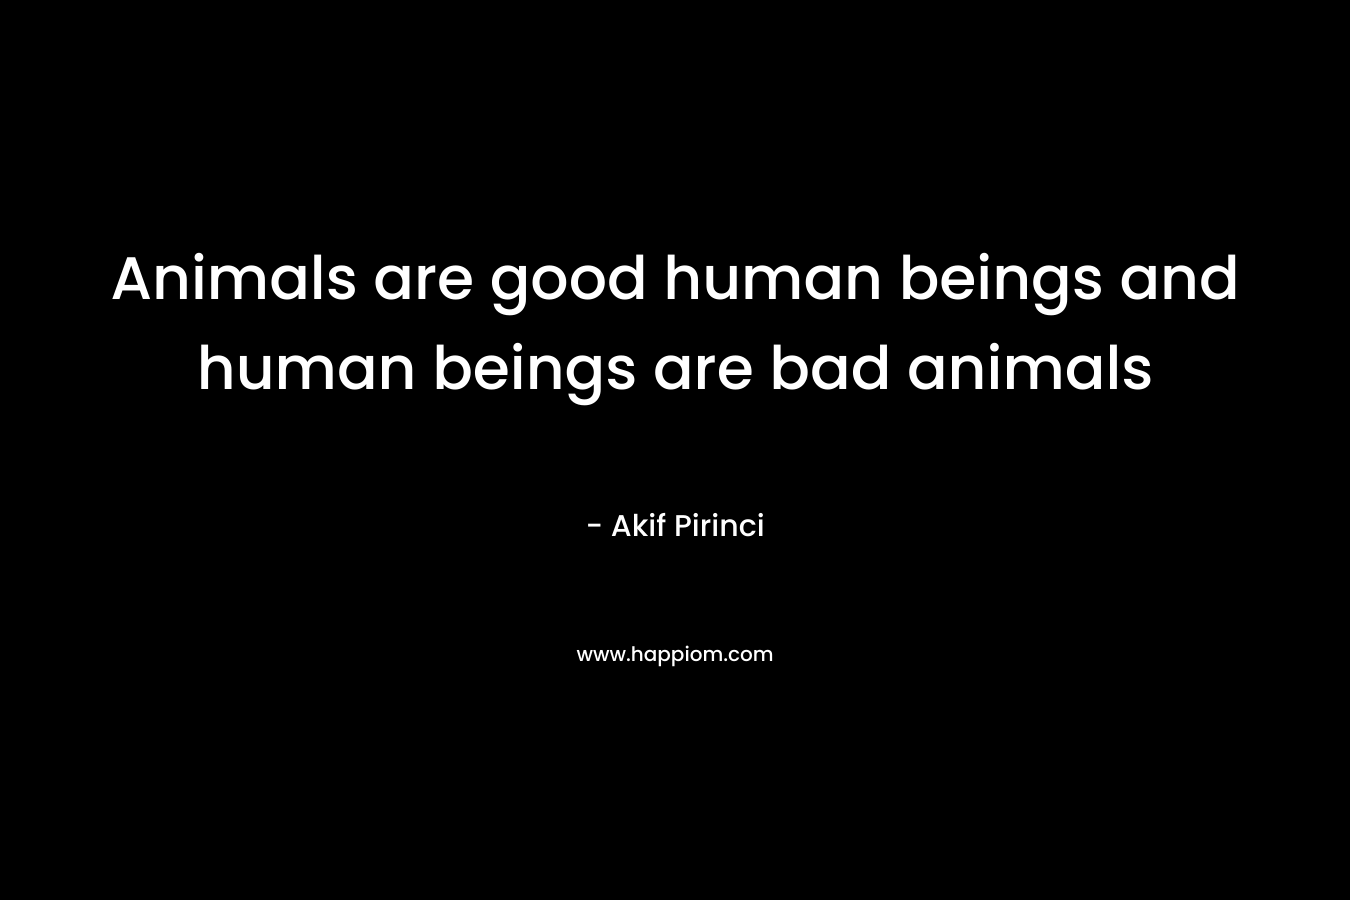 Animals are good human beings and human beings are bad animals